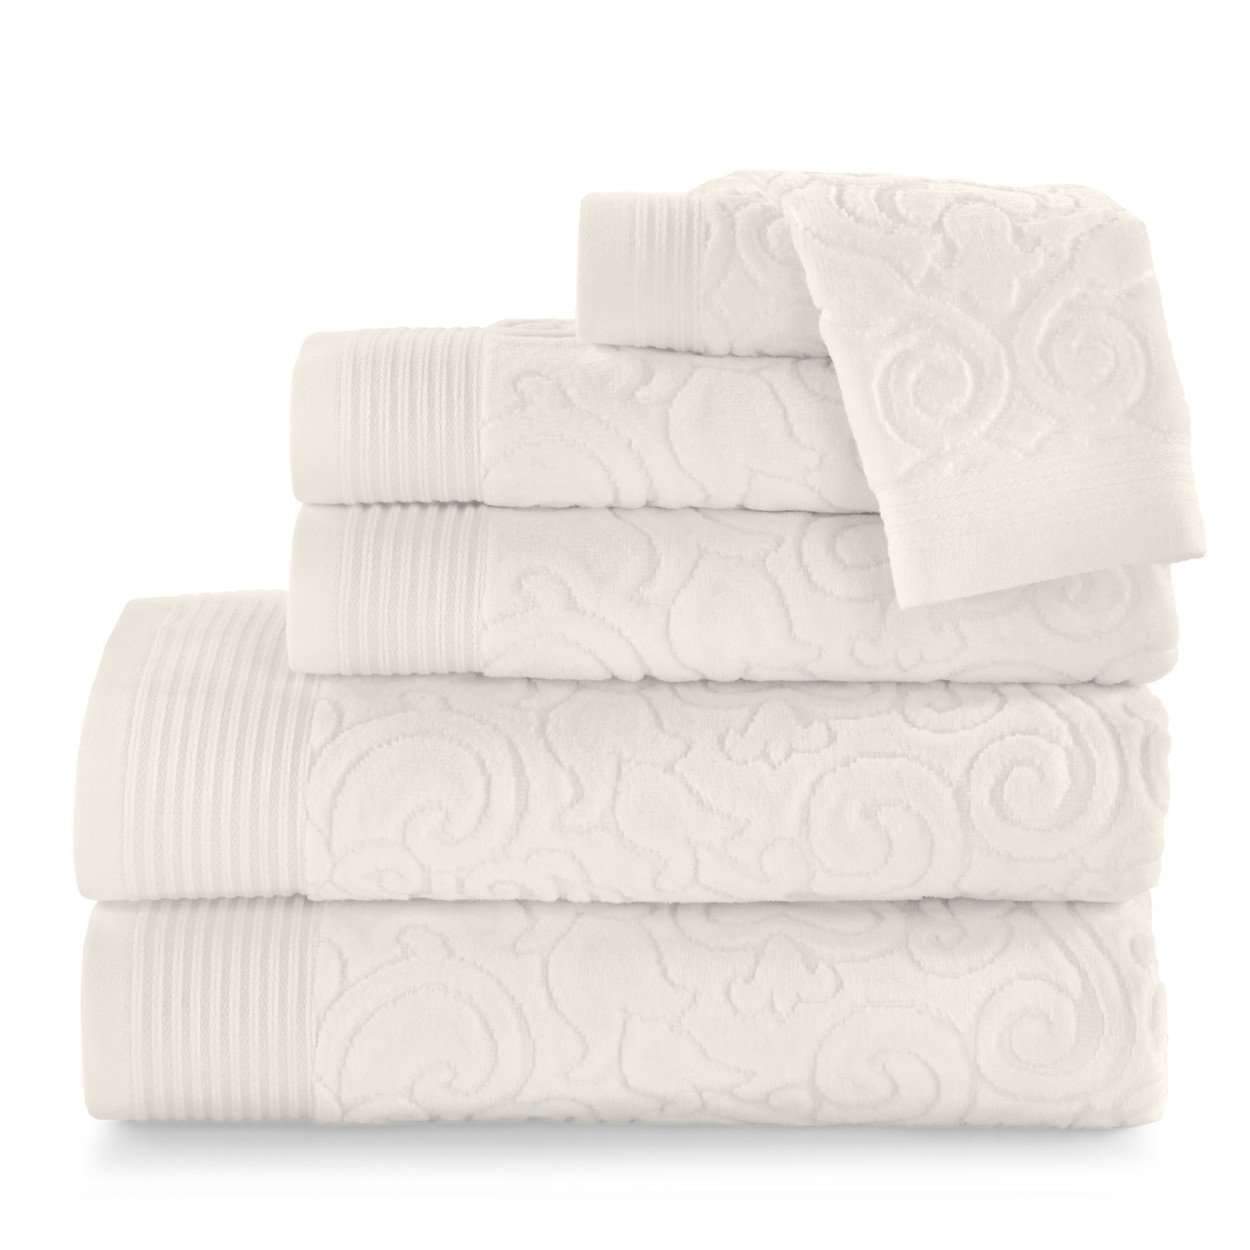 Towels Park Avenue Bath Collection by Peacock Alley Wash Cloth 12x12 / Ivory Peacock Alley